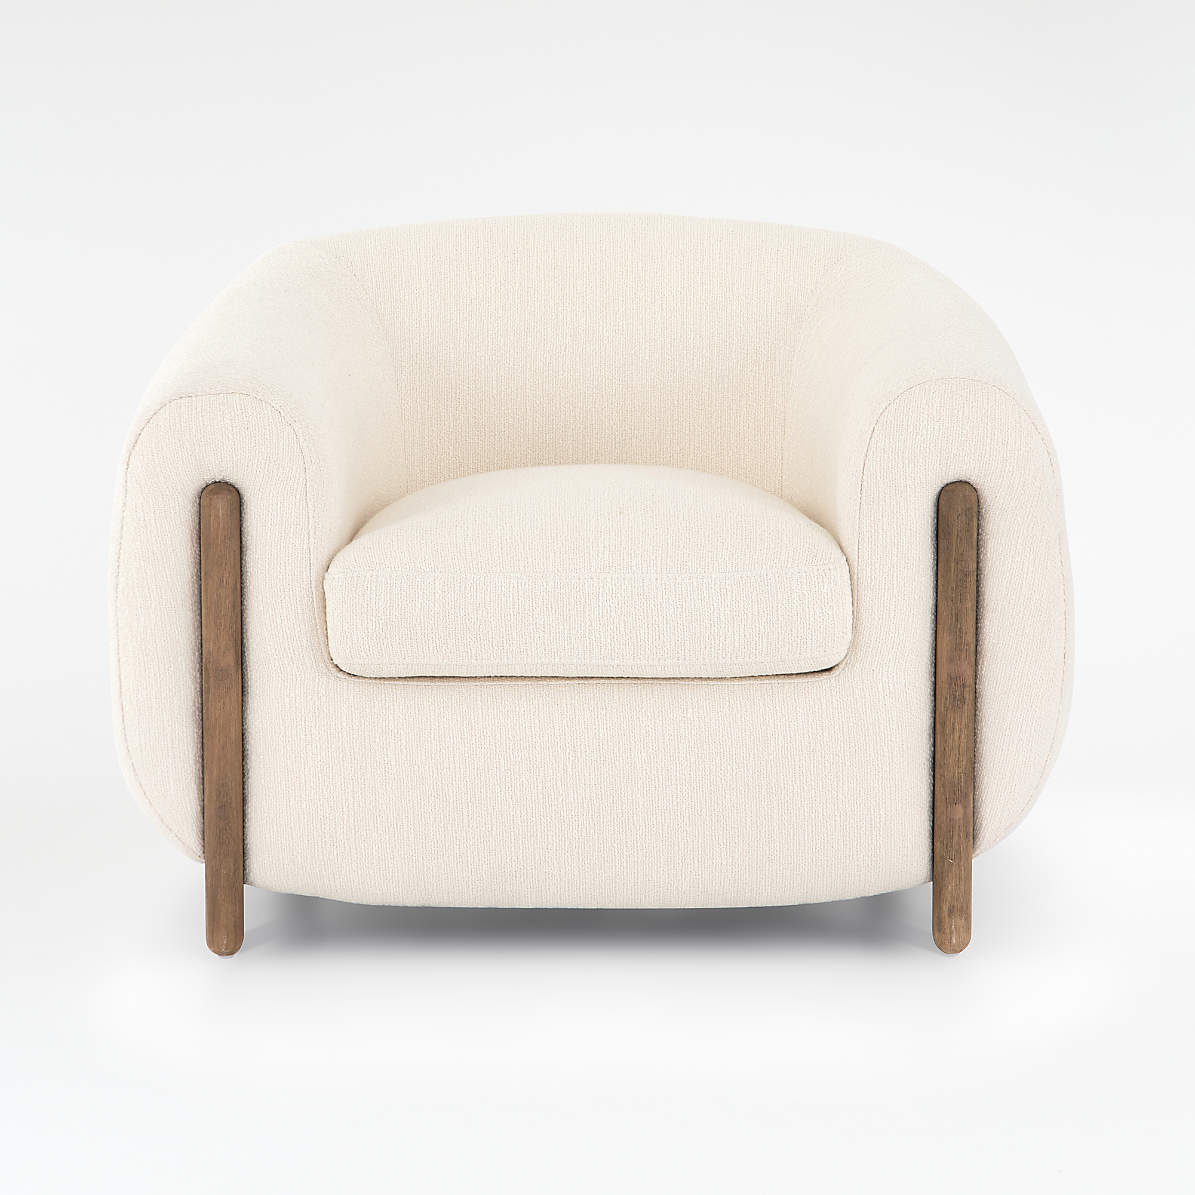 Tub Chairs Nora Tub Chair + Reviews | Crate and Barrel